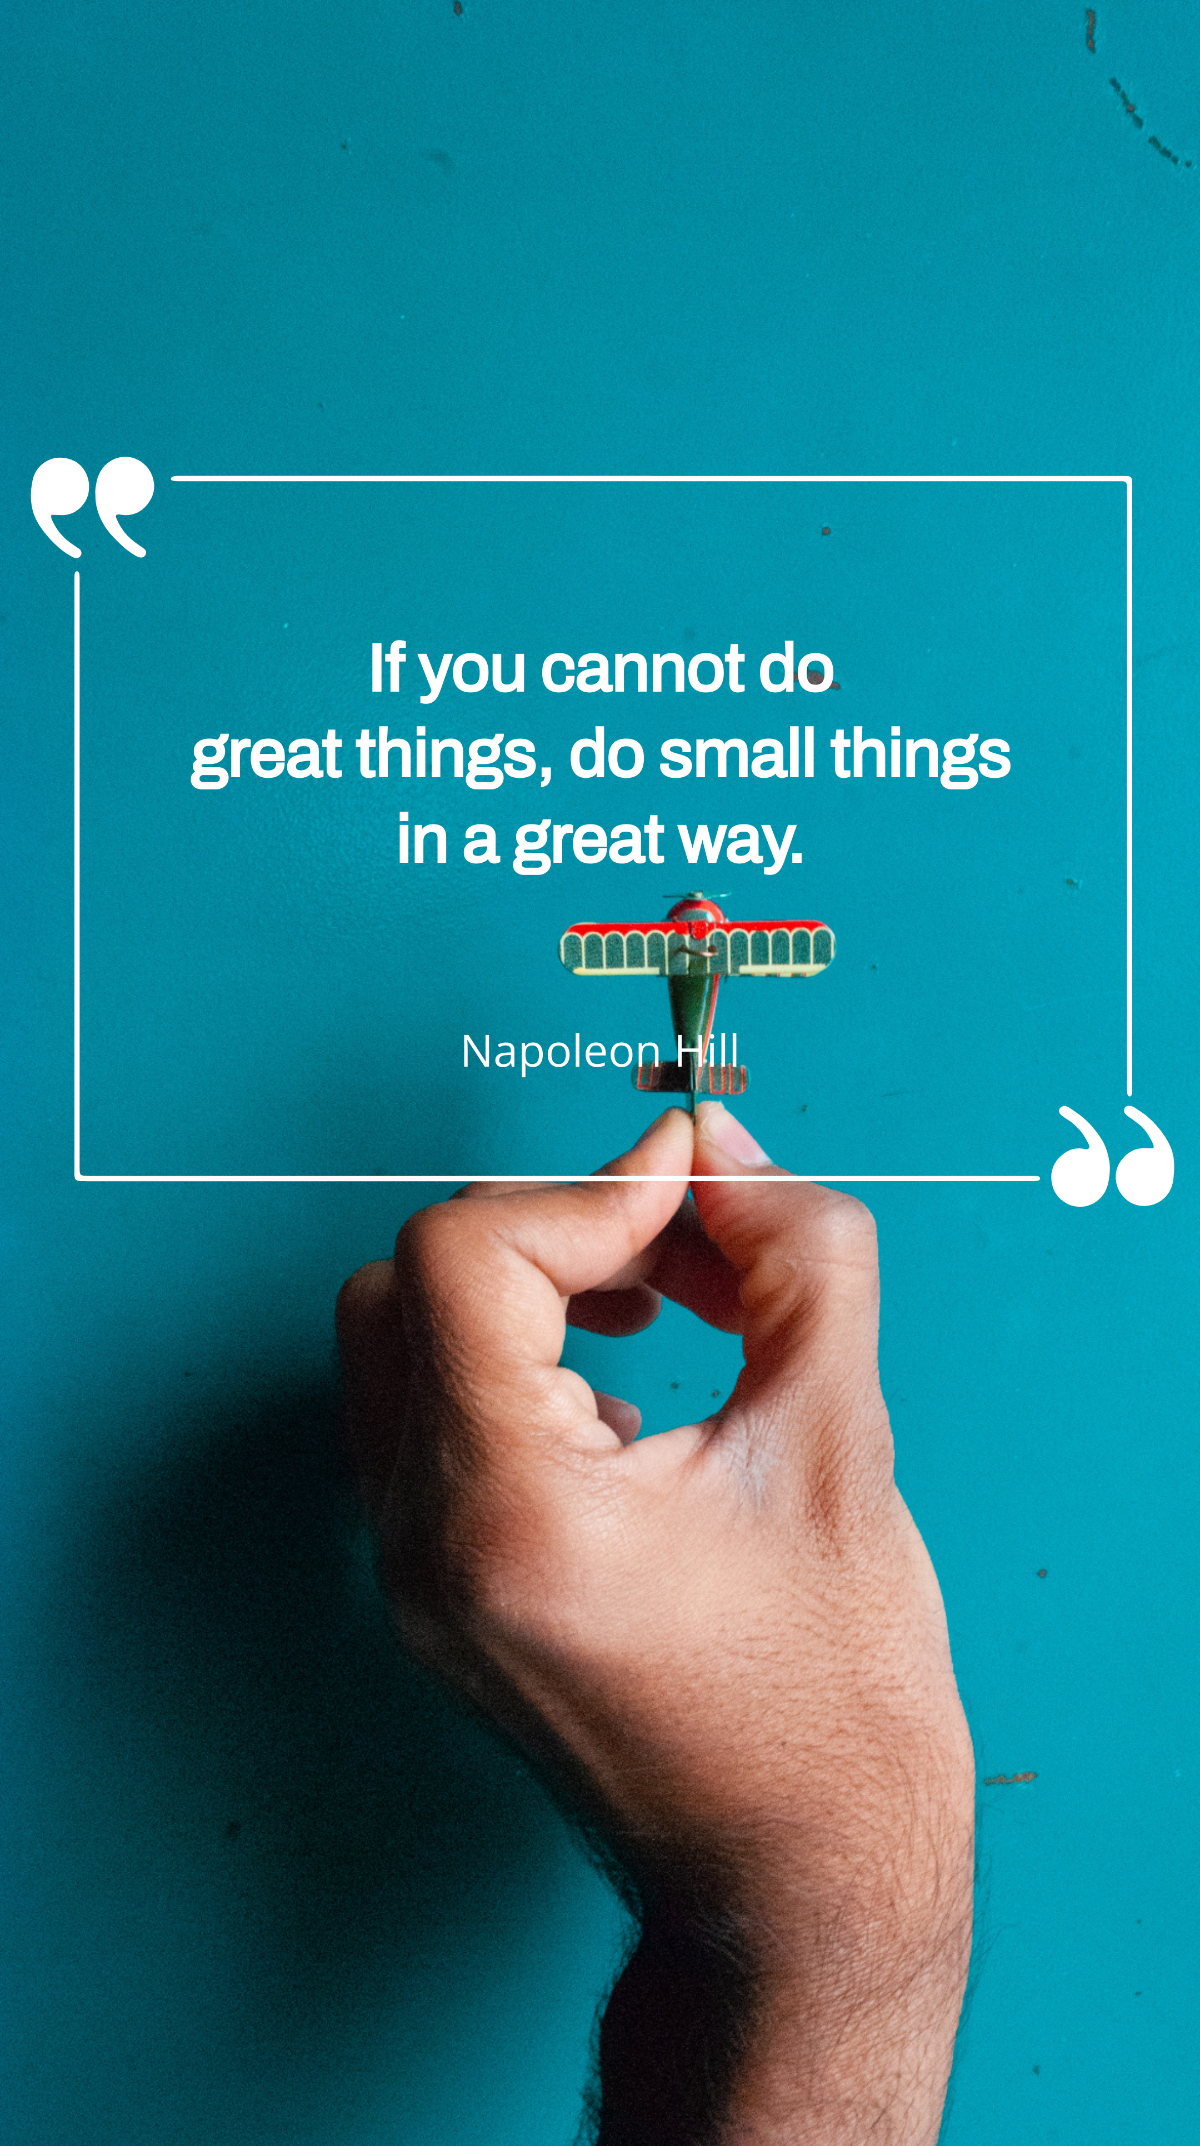 Napoleon Hill  - If you cannot do great things, do small things in a great way